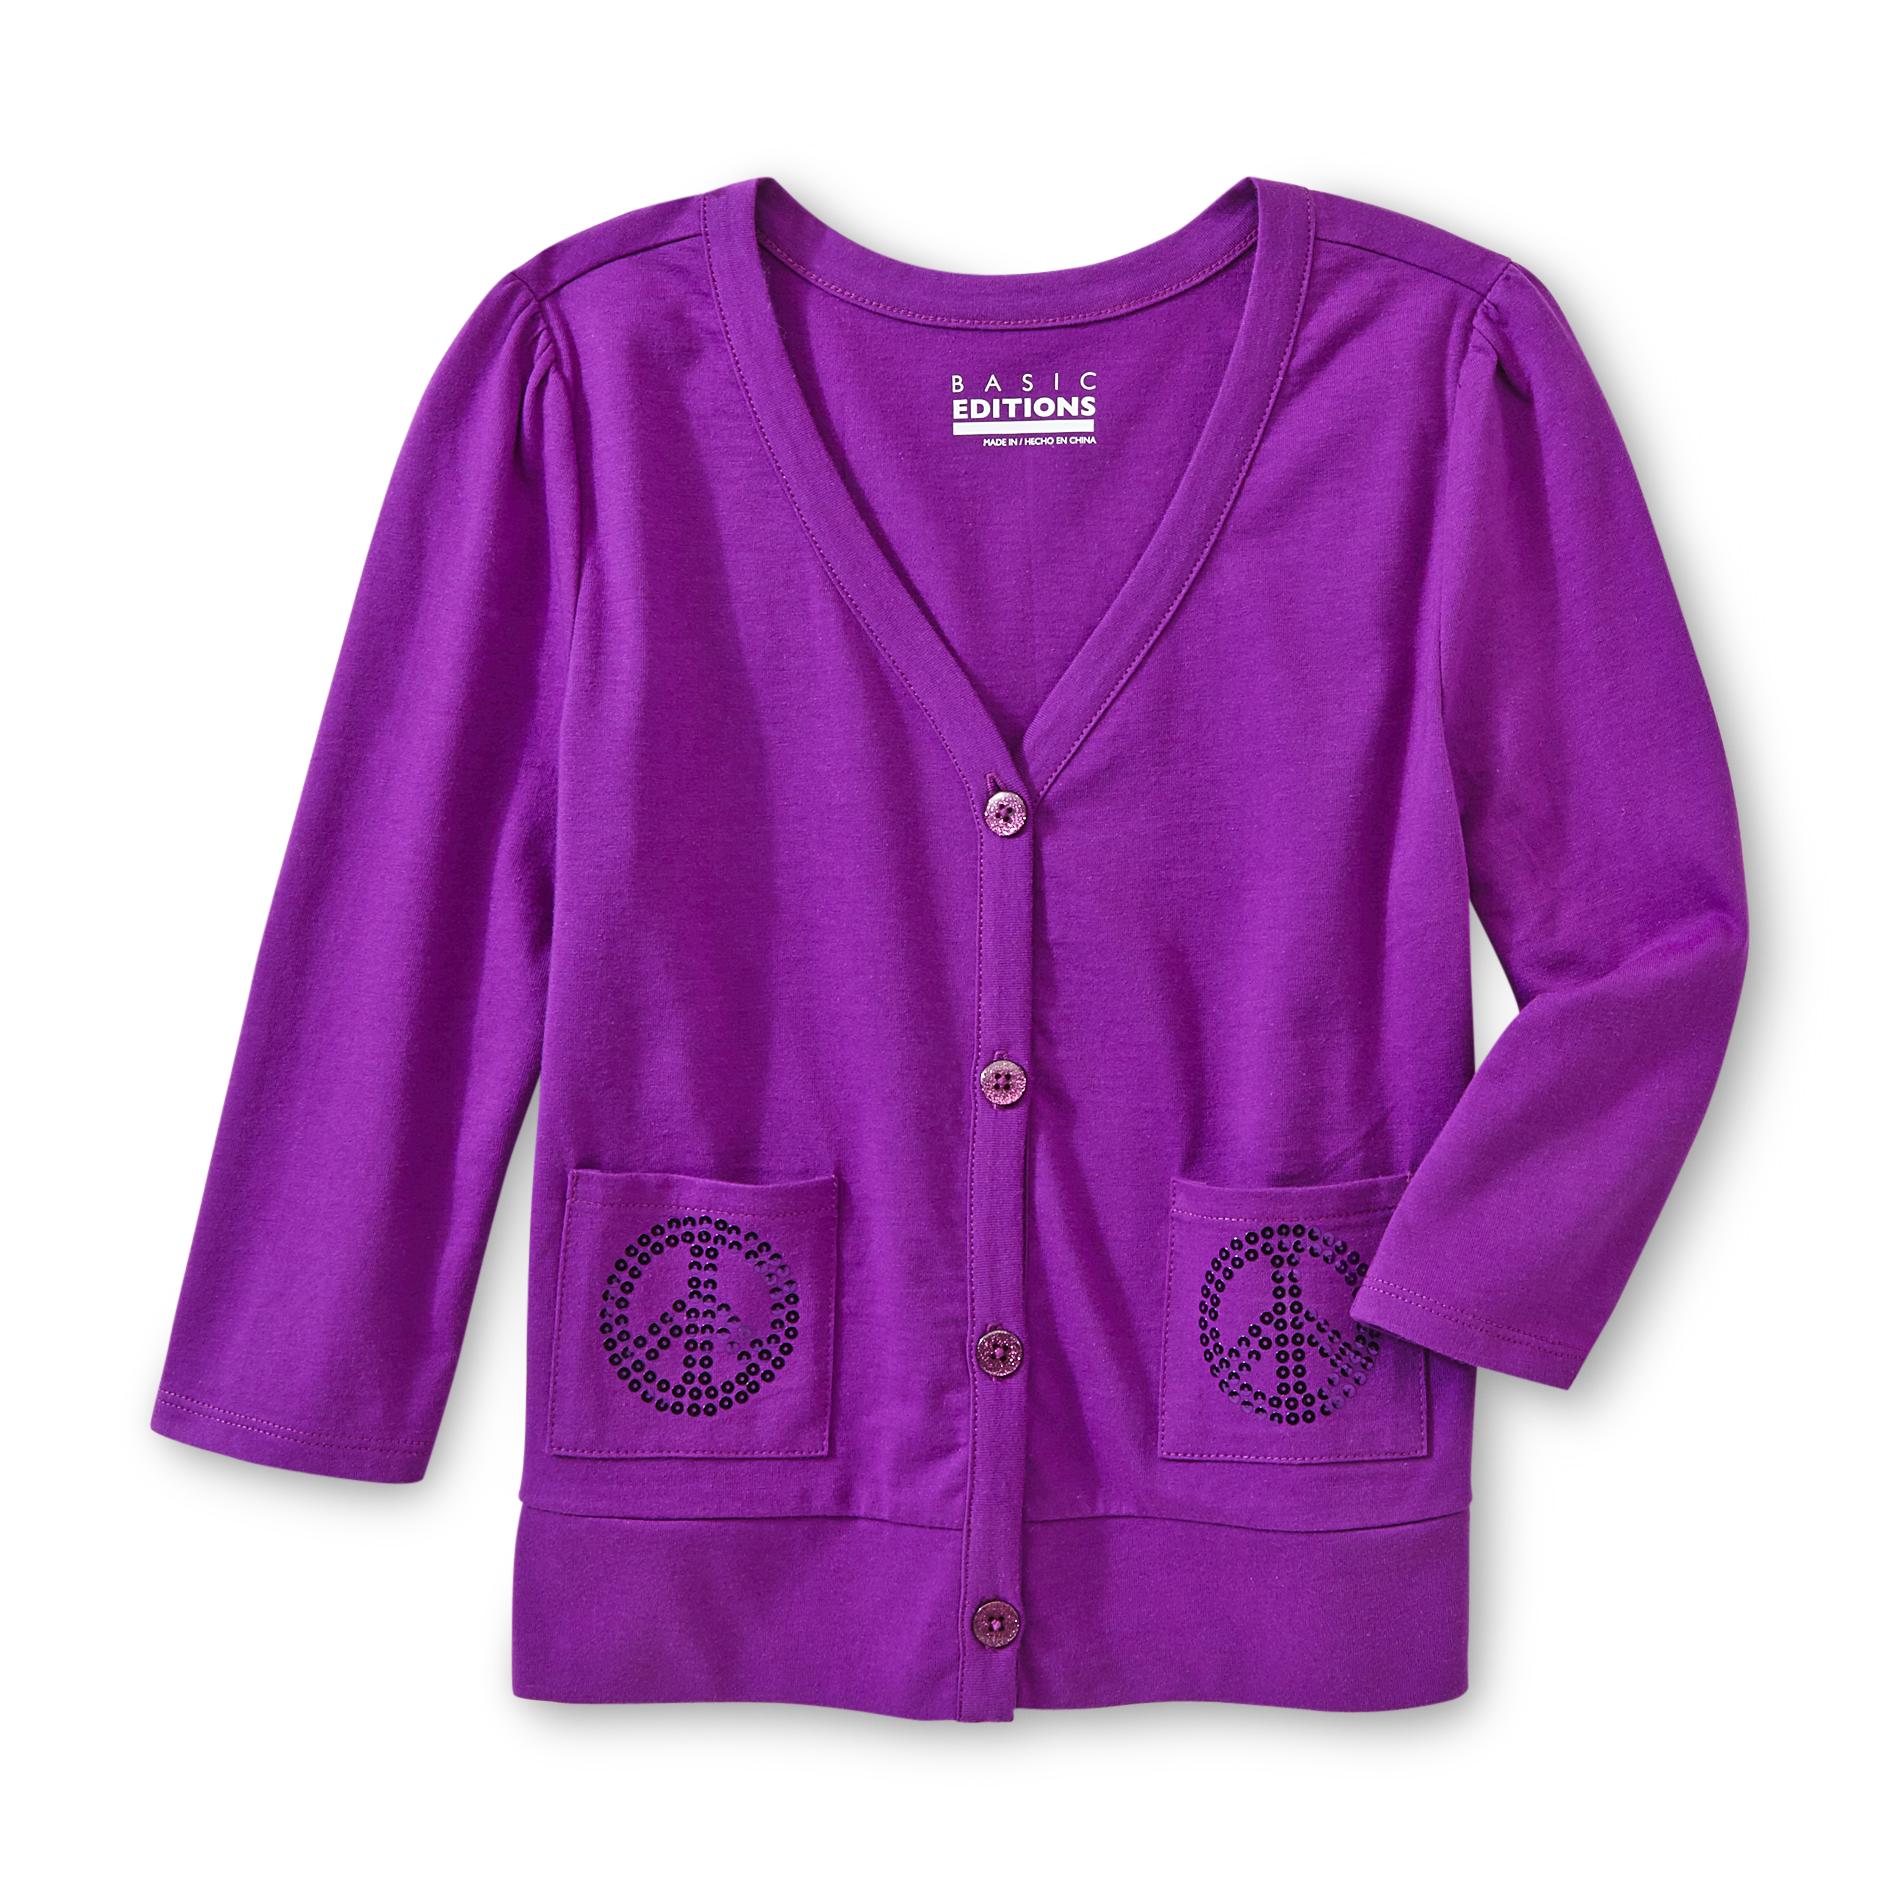 Basic Editions Girl's Sequin Pocket Cardigan - Peace